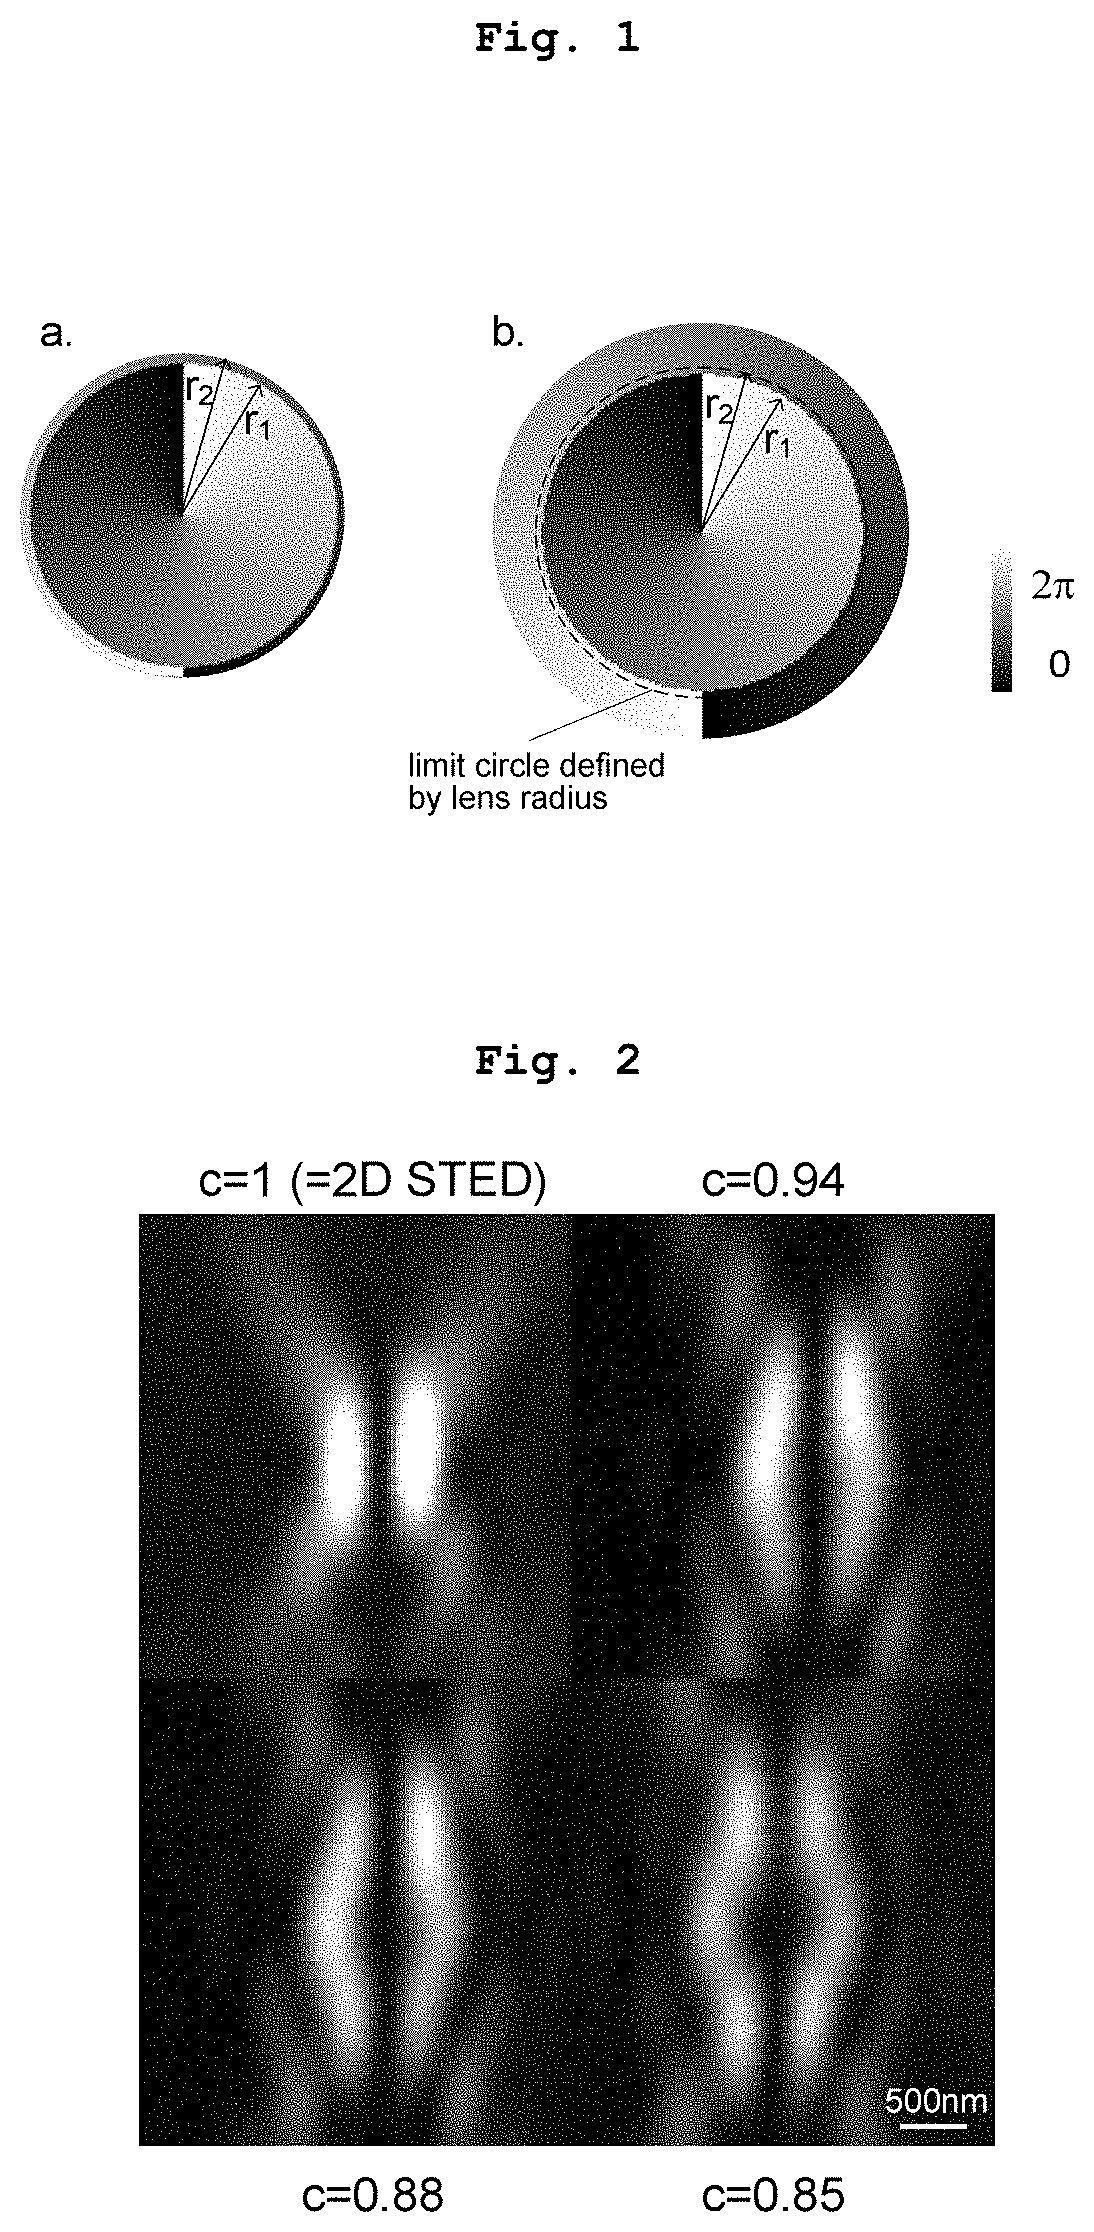 Device for improving performance in STED and RESOLFT microscopy using a single phase mask